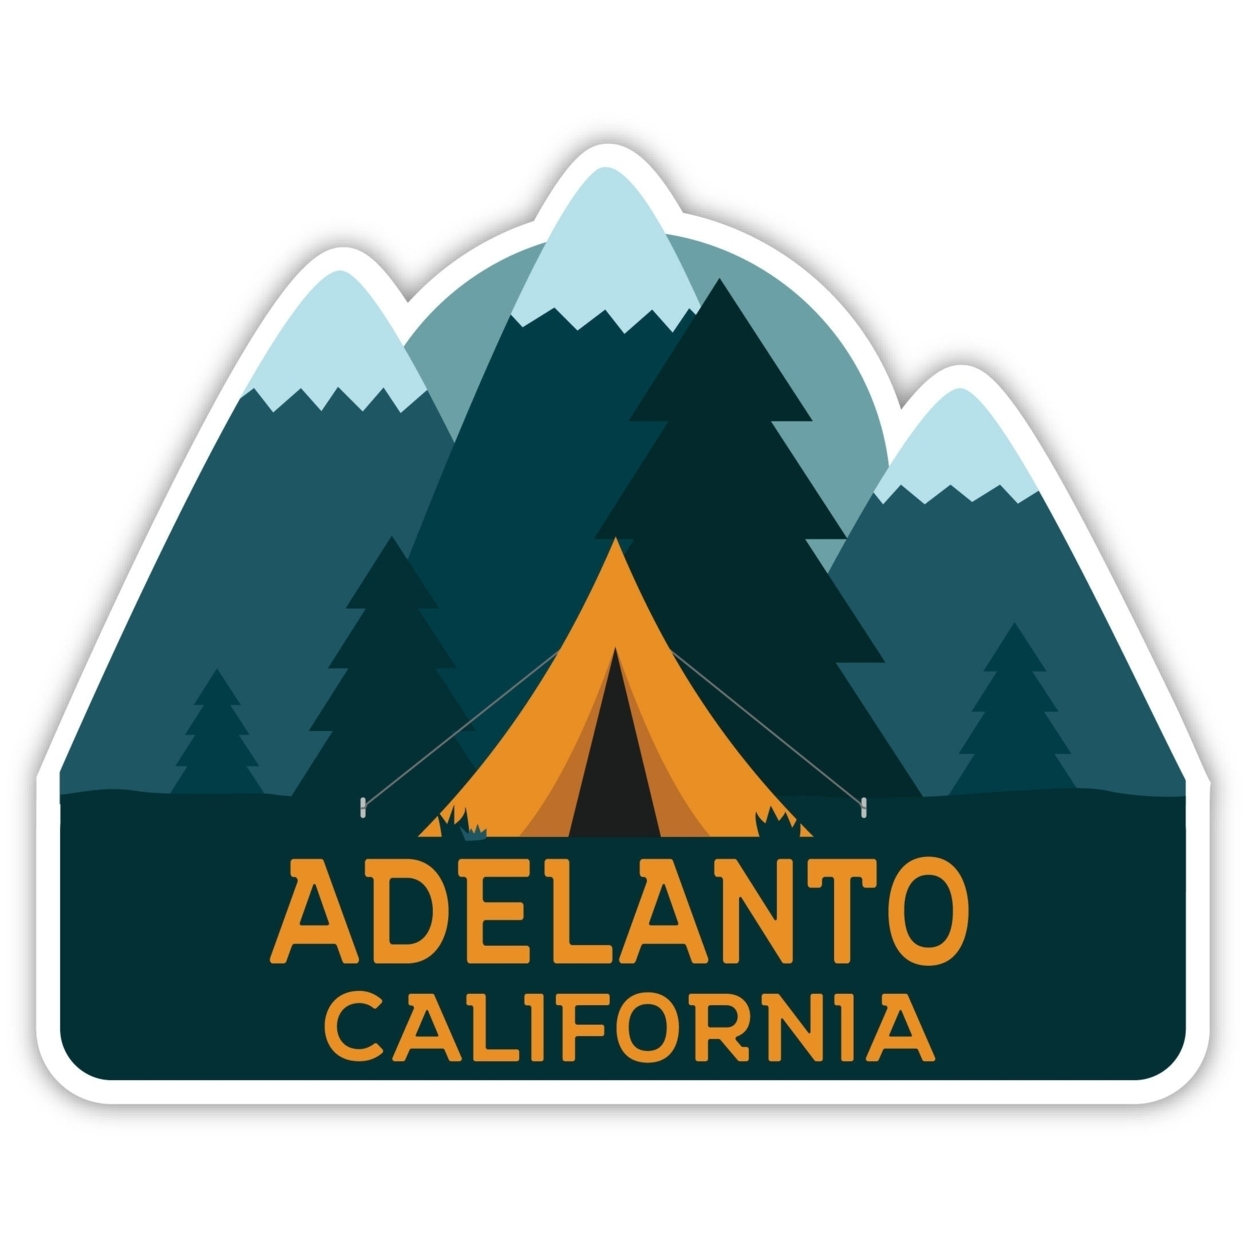 Adelanto California Souvenir Decorative Stickers (Choose Theme And Size) - 4-Pack, 12-Inch, Tent